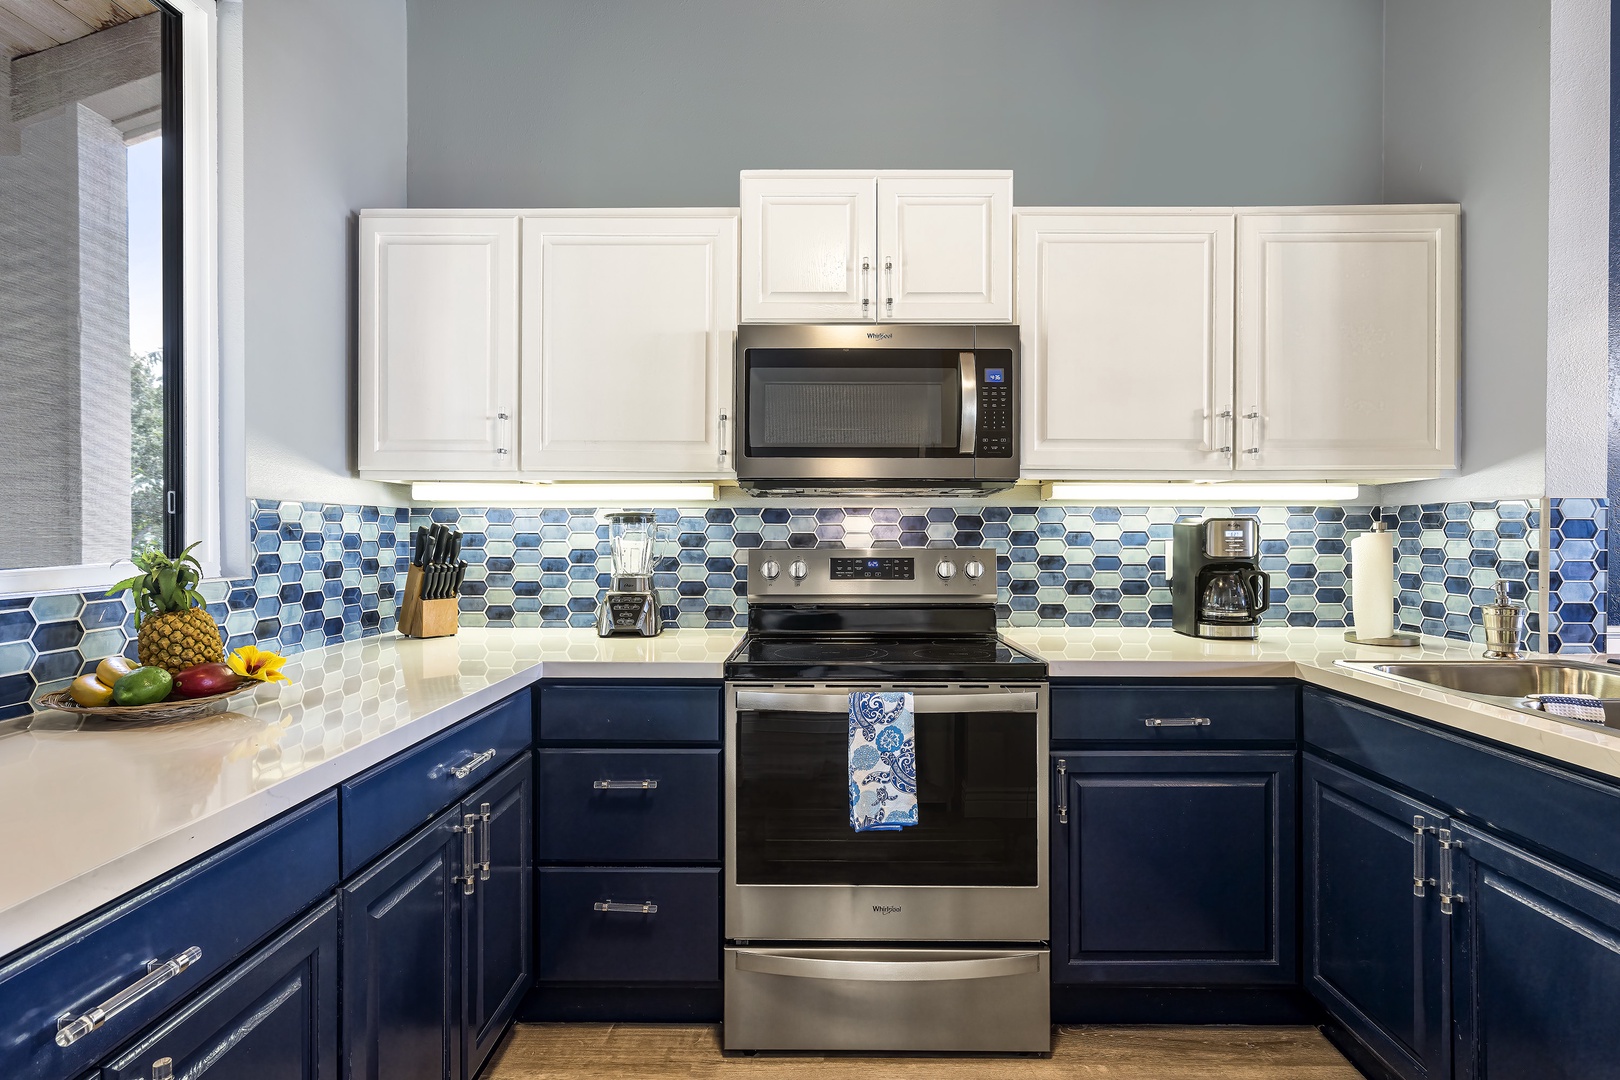 Kailua Kona Vacation Rentals, Keauhou Kona Surf & Racquet 9303 - Upgraded kitchen with everything you could need to prepare your favorite meals while in Hawaii!